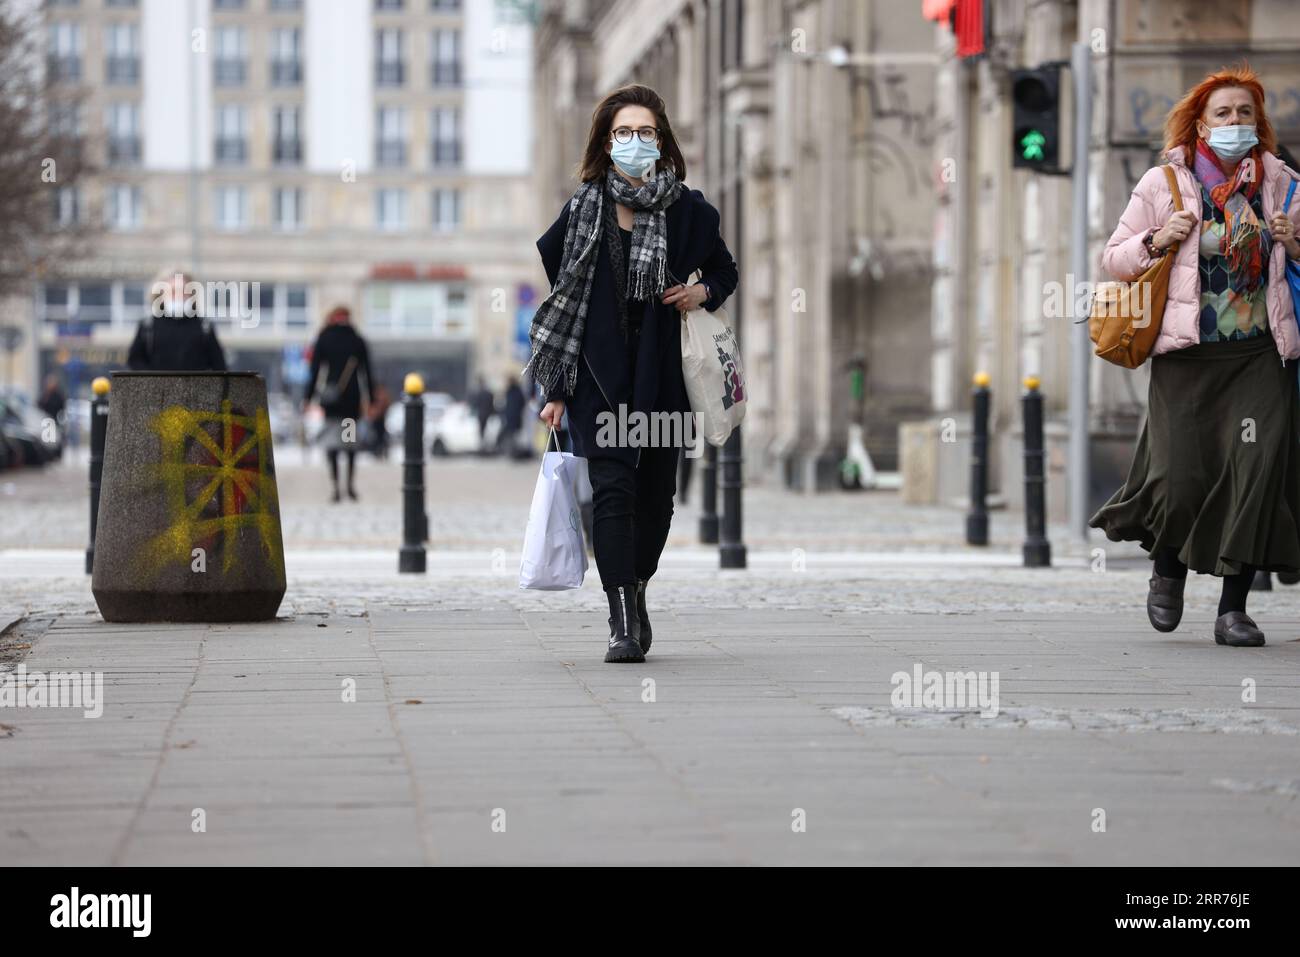 210315 -- WARSAW, March 15, 2021 -- A woman wearing a mask walks in central Warsaw, Poland, on March 15, 2021. The Polish government reintroduced lockdown measures in Warsaw on Monday. According to Polish Health Minister Adam Niedzielski, the lockdown is in force from March 15 to March 28. Hotels, cultural institutions and sports facilities are shut down and the operation of shopping centers is also be restricted. Photo by /Xinhua POLAND-WARSAW-COVID-19-RESTRICTIONS JaapxArriens PUBLICATIONxNOTxINxCHN Stock Photo